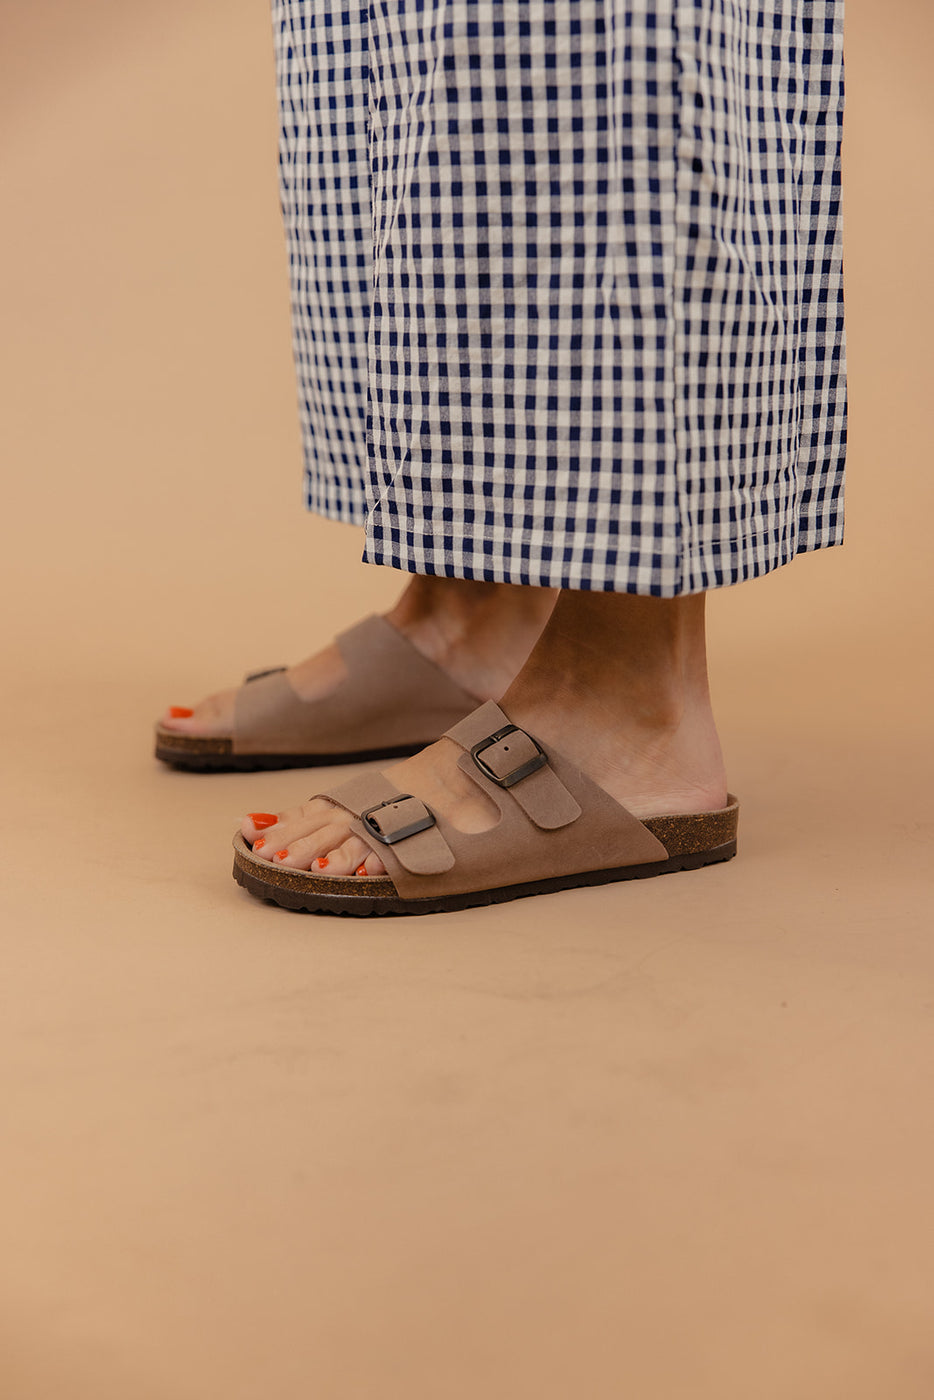 a person's feet wearing sandals